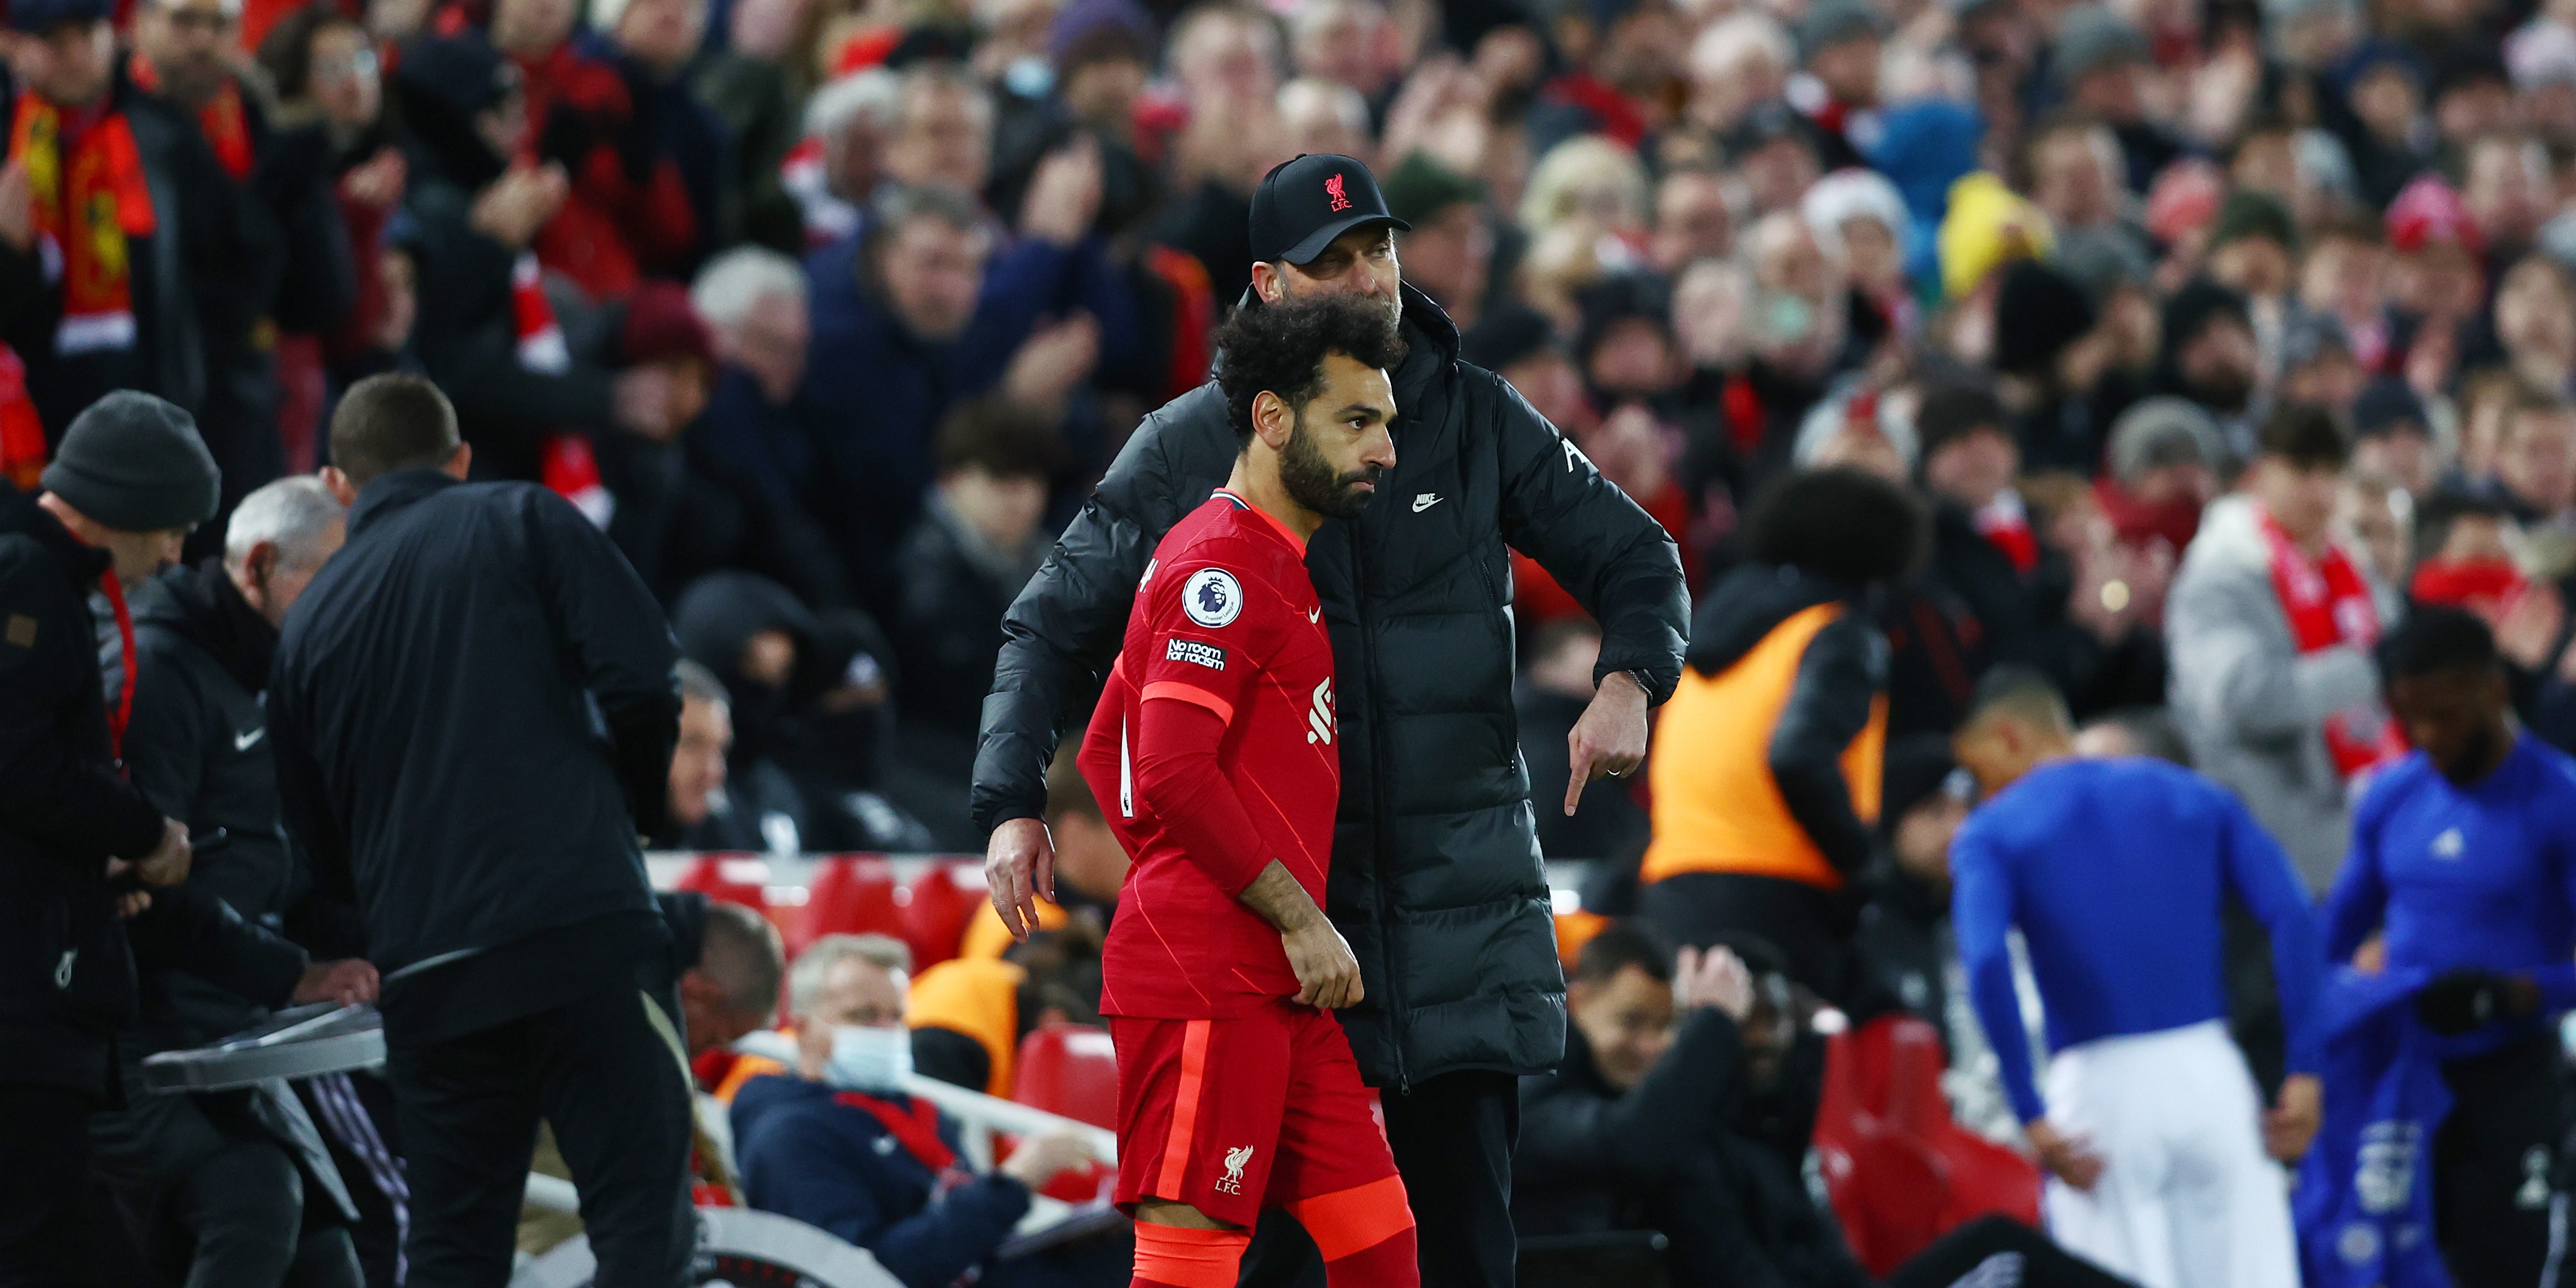 ‘I wouldn’t be happy’ – Ex-Red baffled by Jurgen Klopp’s ‘pass the ball’ claim and insists Mo Salah ‘did everything right’